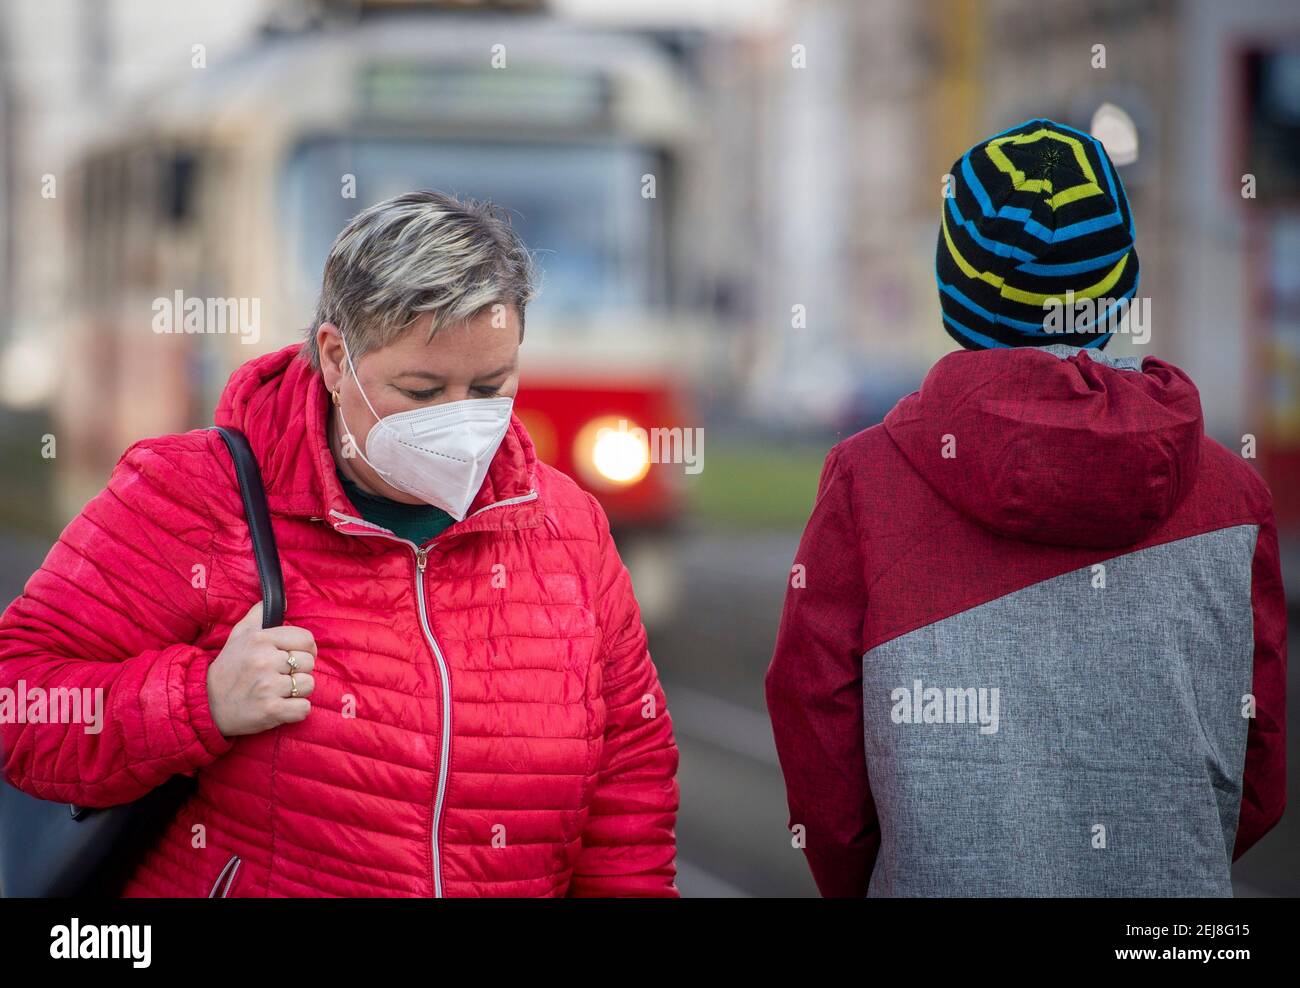 Prague, Czech Republic. 20th Feb, 2021. People with respirators on Saturday, February 20, 2021, in Prague, Czech Republic. Health Ministry orders wearing of respirators, nano masks or two surgical face masks in shops, public transport and other public places from Monday, February 22. Credit: Katerina Sulova/CTK Photo/Alamy Live News Stock Photo